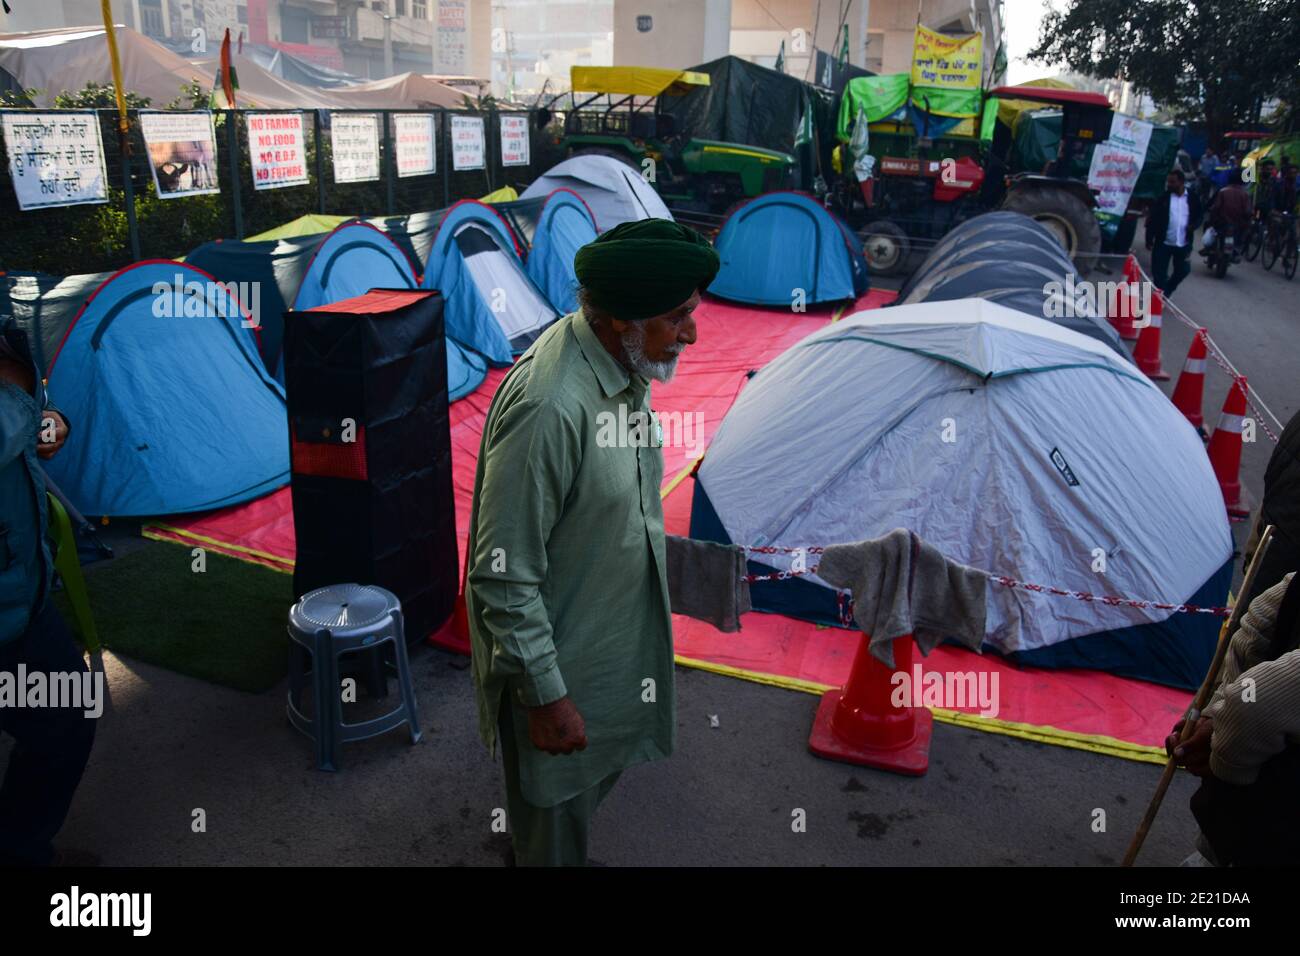 Delhi, India. 10th Jan, 2020. Waterproof tents installed by protesters during the ongoing farmers' protest against the new farm laws, at Tikri Border.Indian farmers are protesting against the three farm acts passed by Parliament in September 2020. Local farmer unions, and political opponents say the law will put farmers at the 'mercy of corporates'. Credit: SOPA Images Limited/Alamy Live News Stock Photo